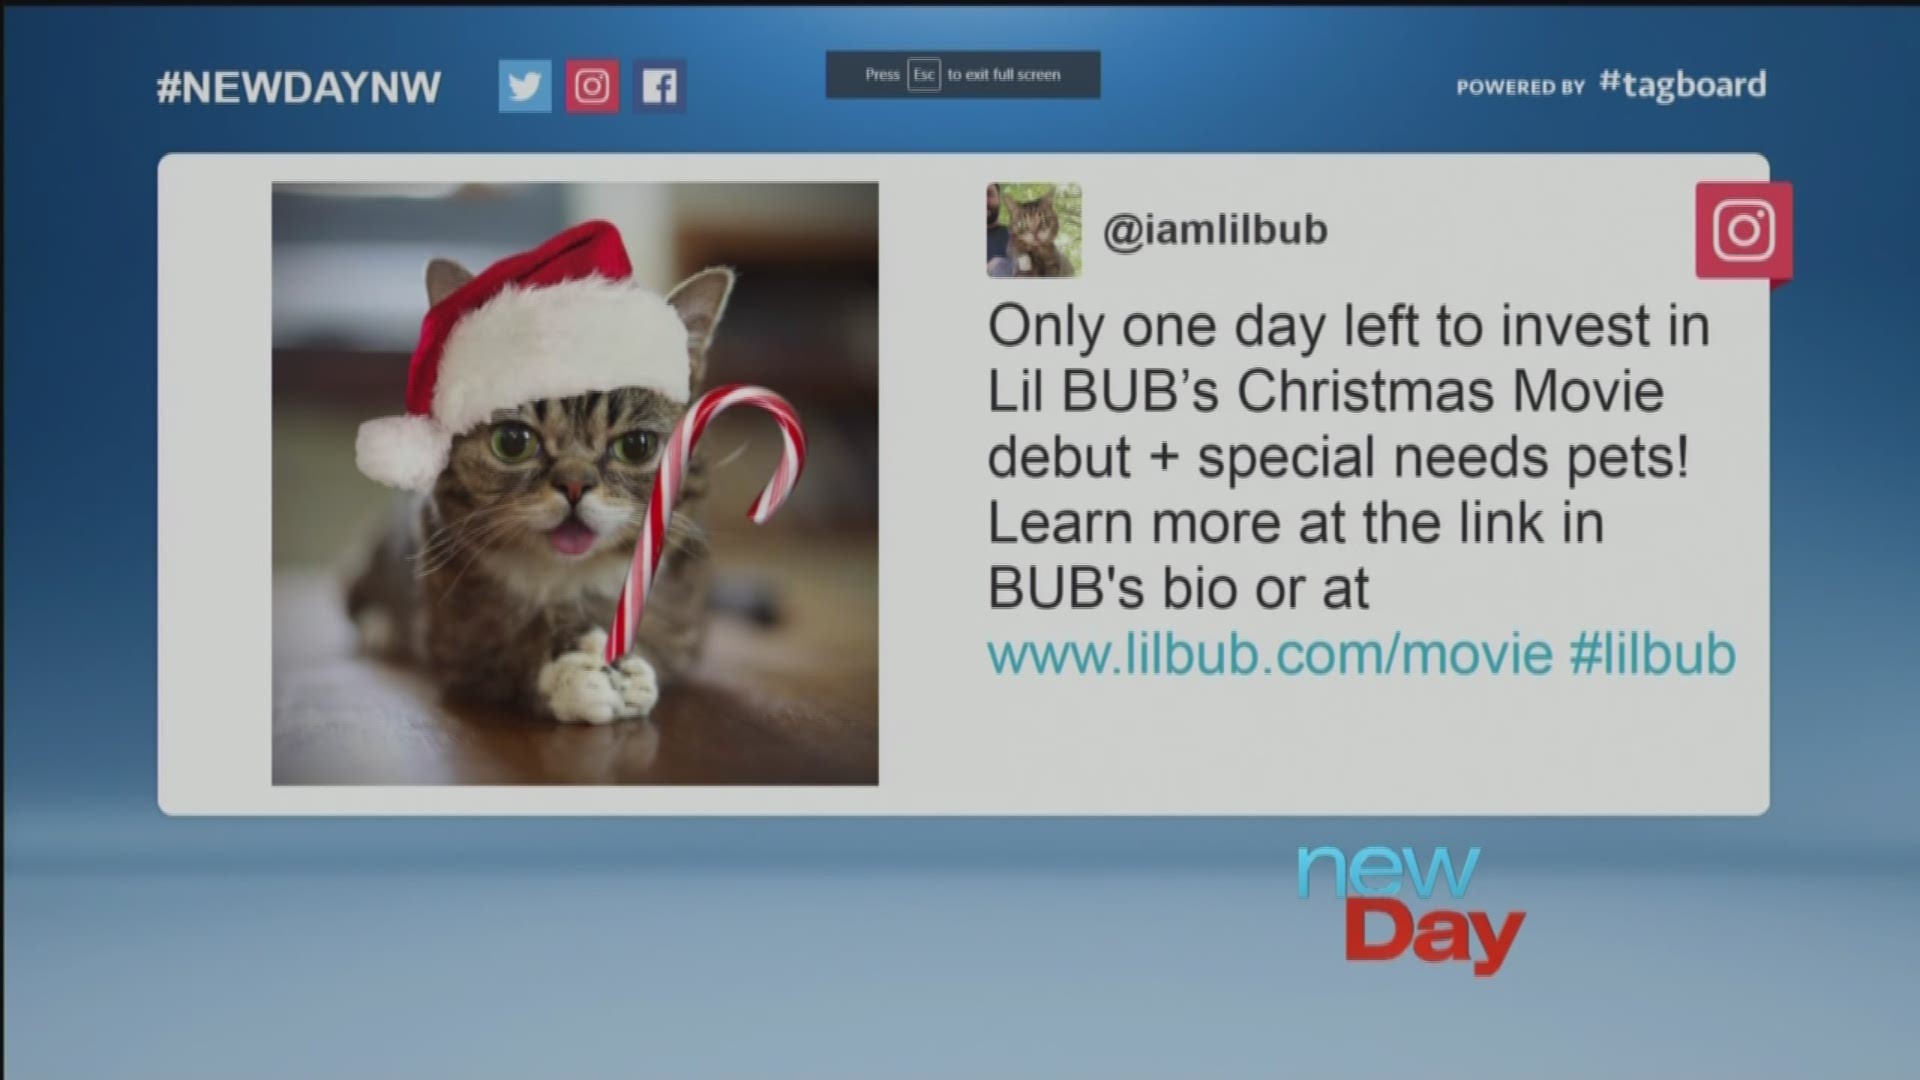 Author, talk show host, and movie star LIL BUB the cat makes an appearance on New Day NW. LIL Bub is one amazing cat who has helped raise over $300,000 for animals in need.